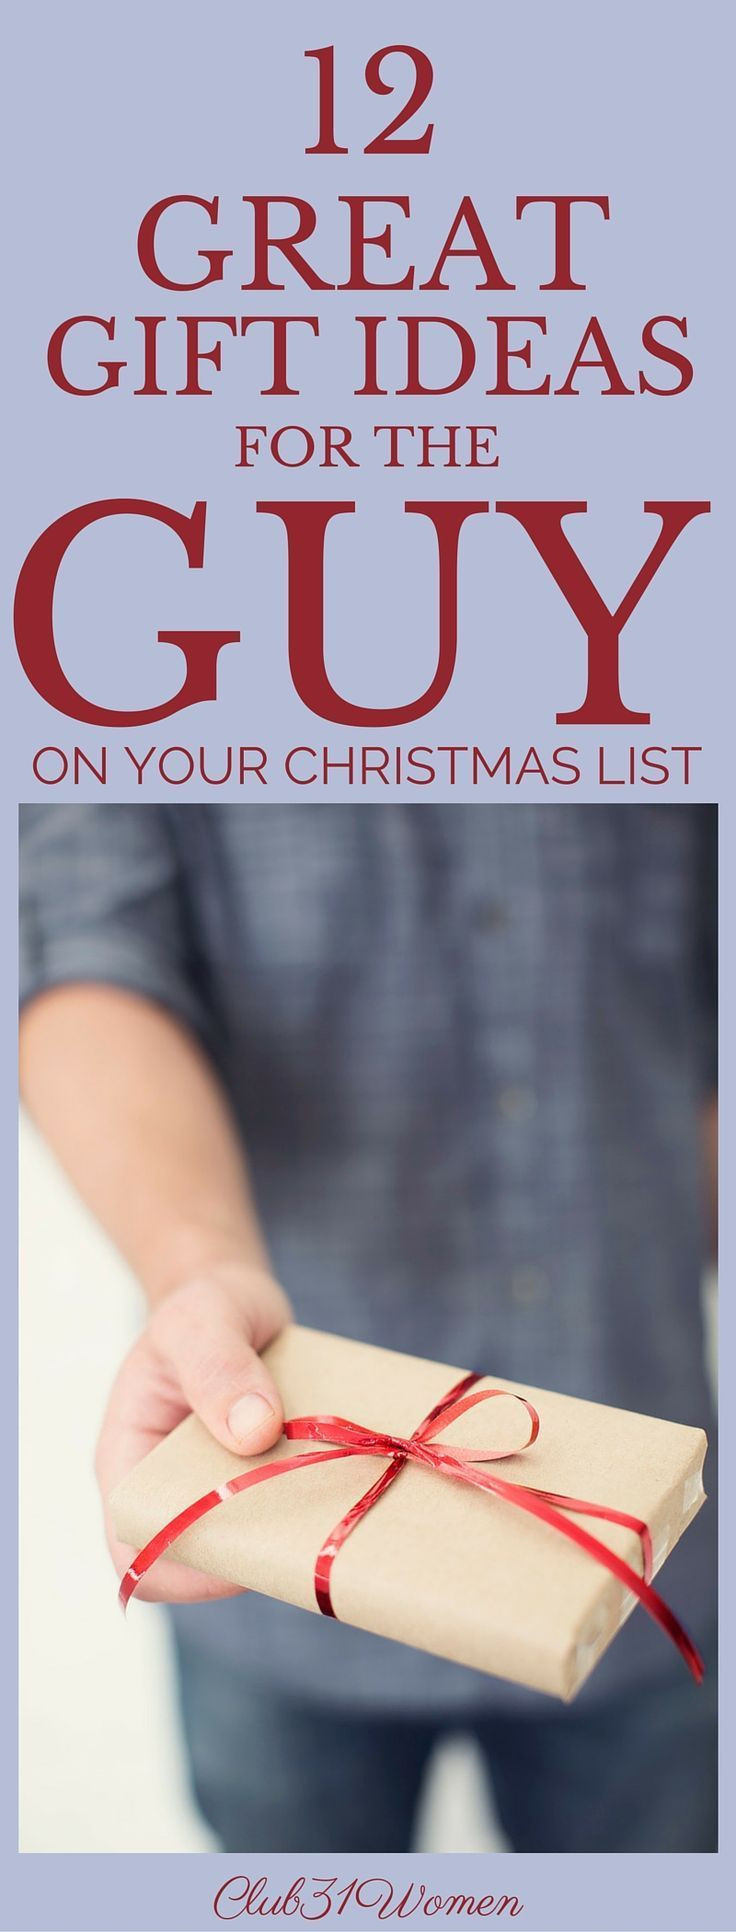 Meaningful Gift Ideas For Boyfriend
 12 Great Gift Ideas for the Guy Your Christmas List